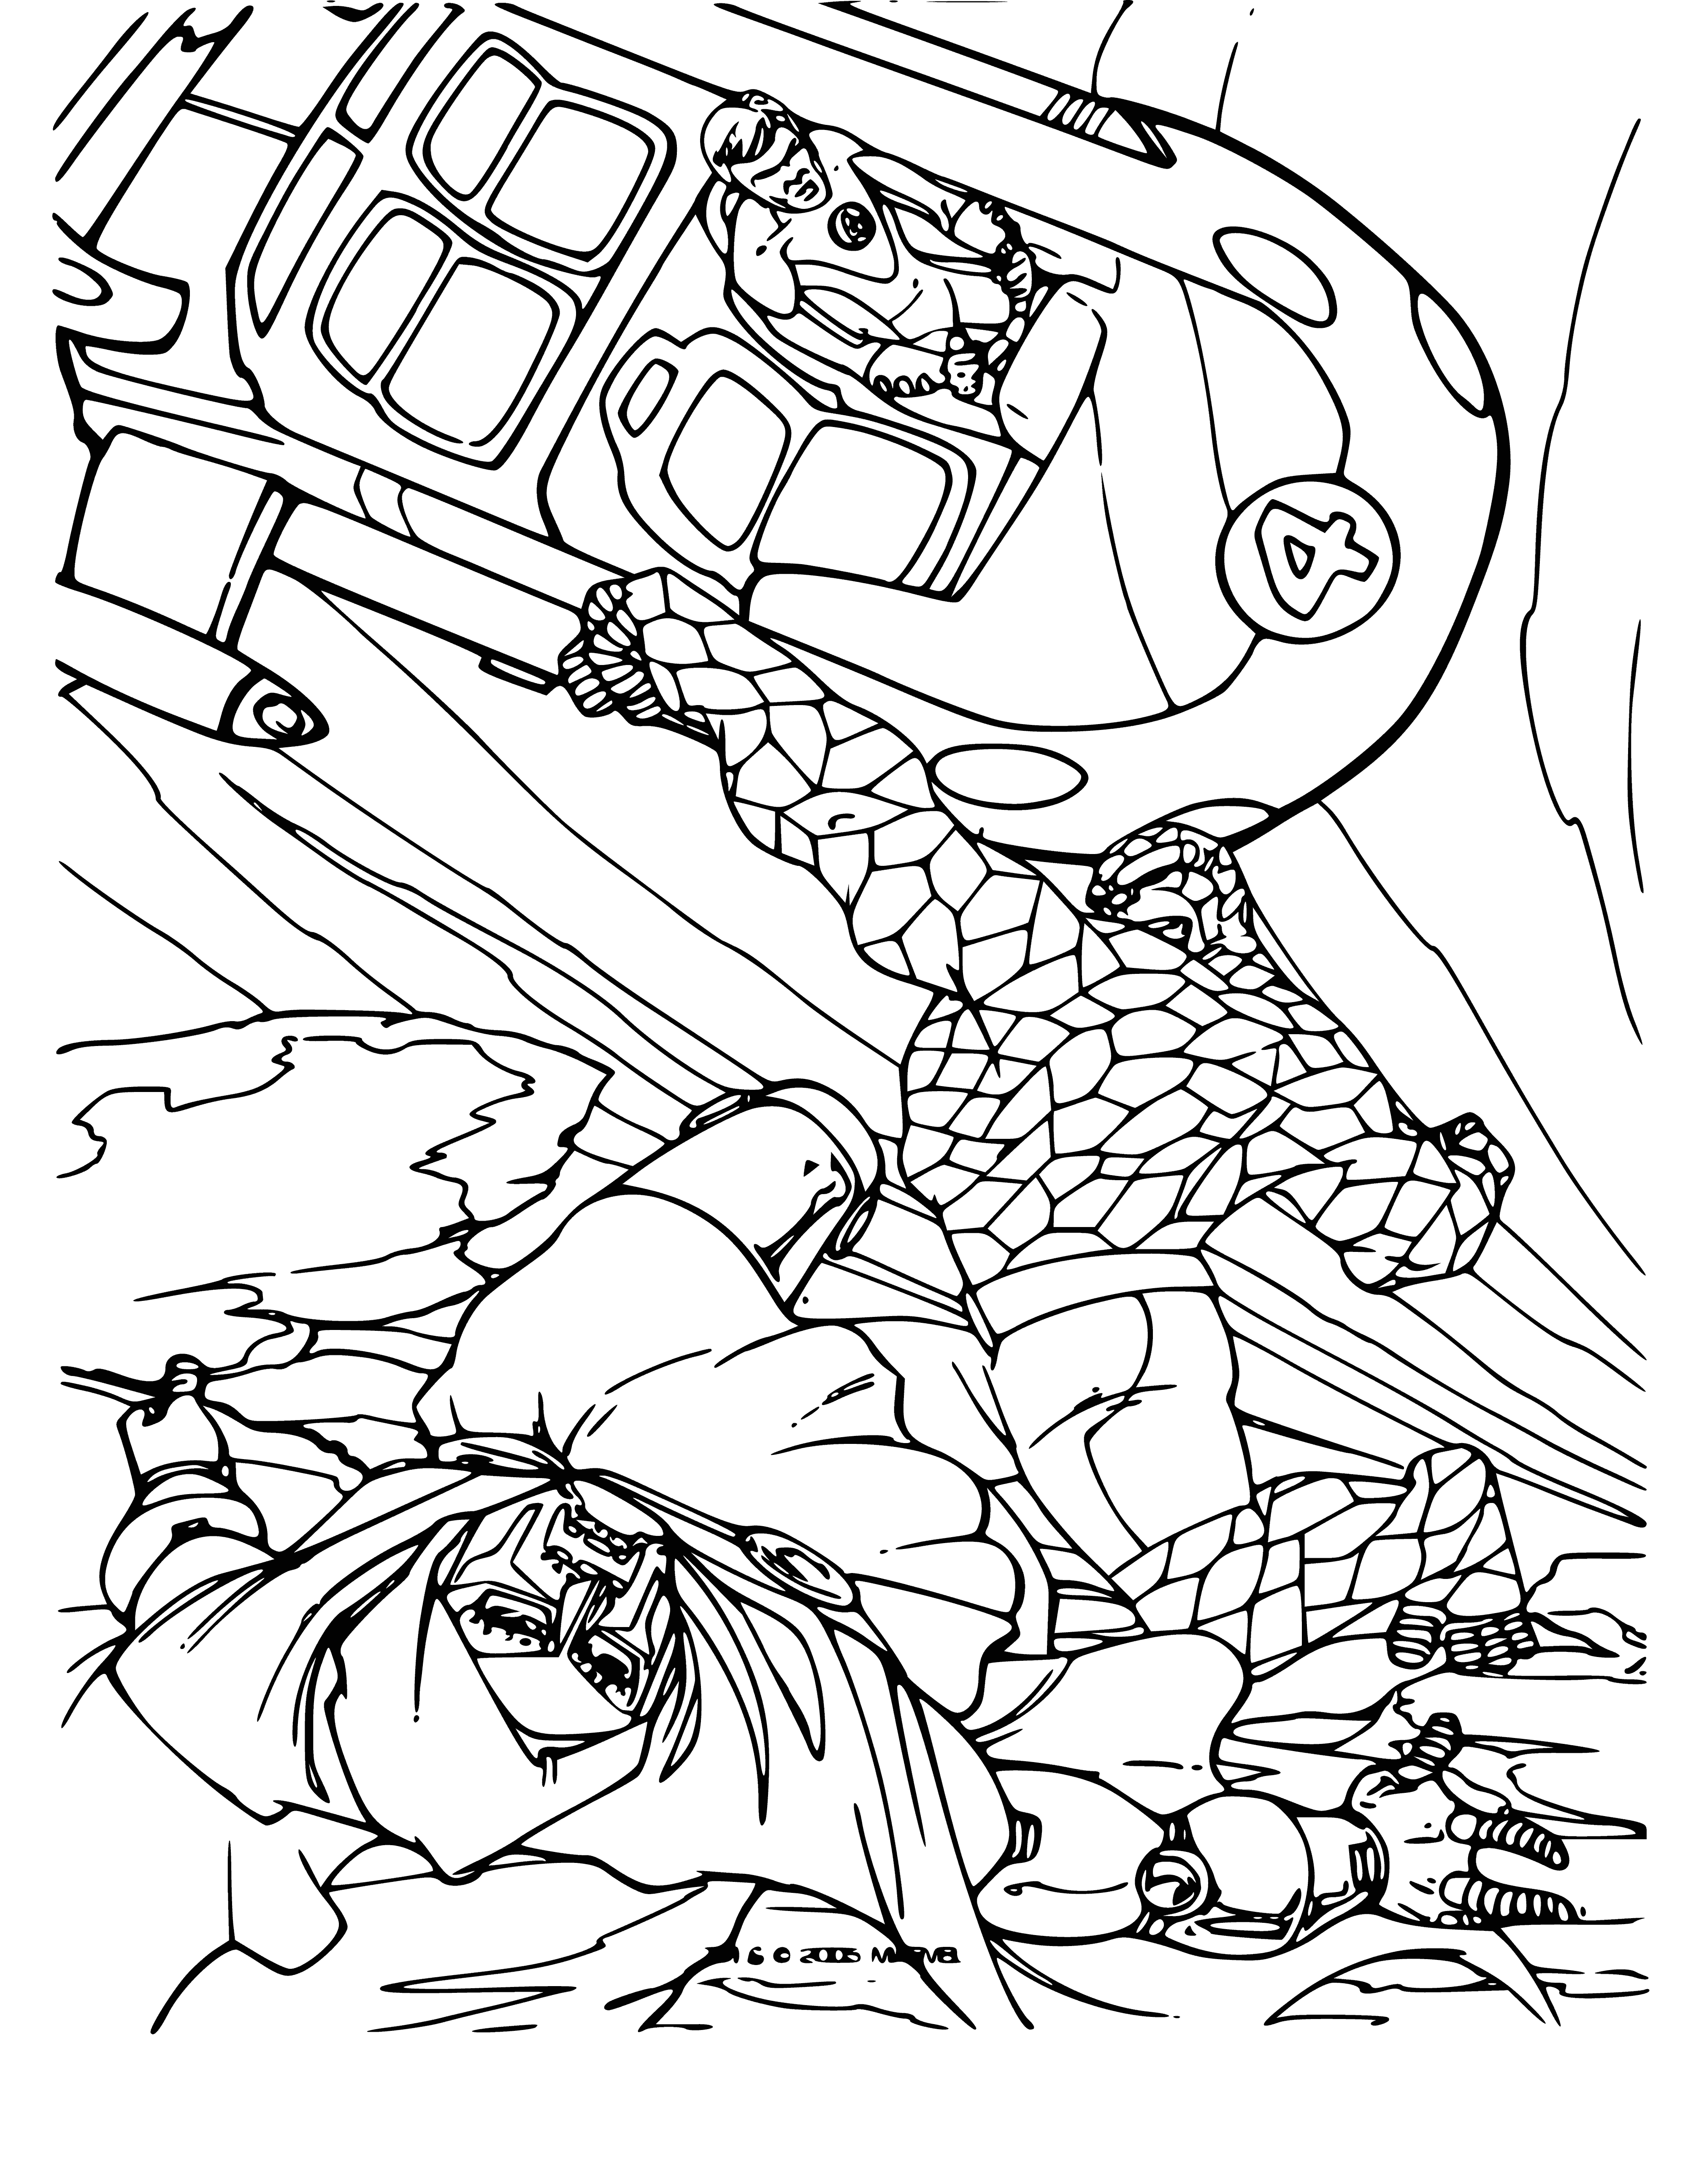 coloring page: The Fantastic Four focus their energy as a glowing, orange ball appears in their circle. Buildings in the background watch on.